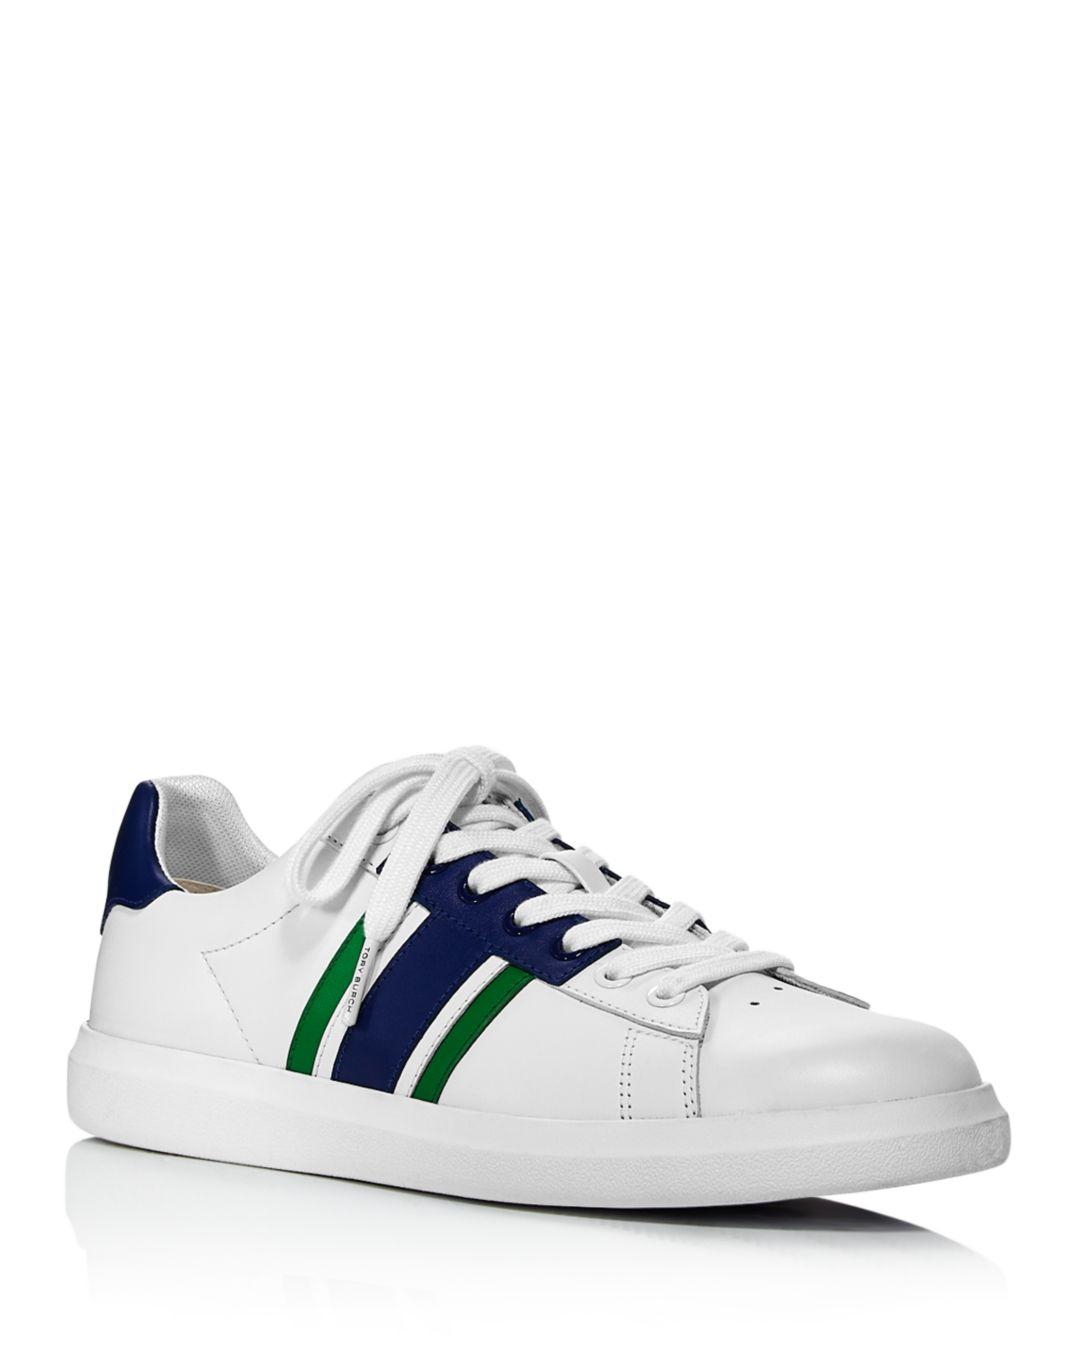 Tory Burch Suede Howell Court Striped Sneaker | Lyst